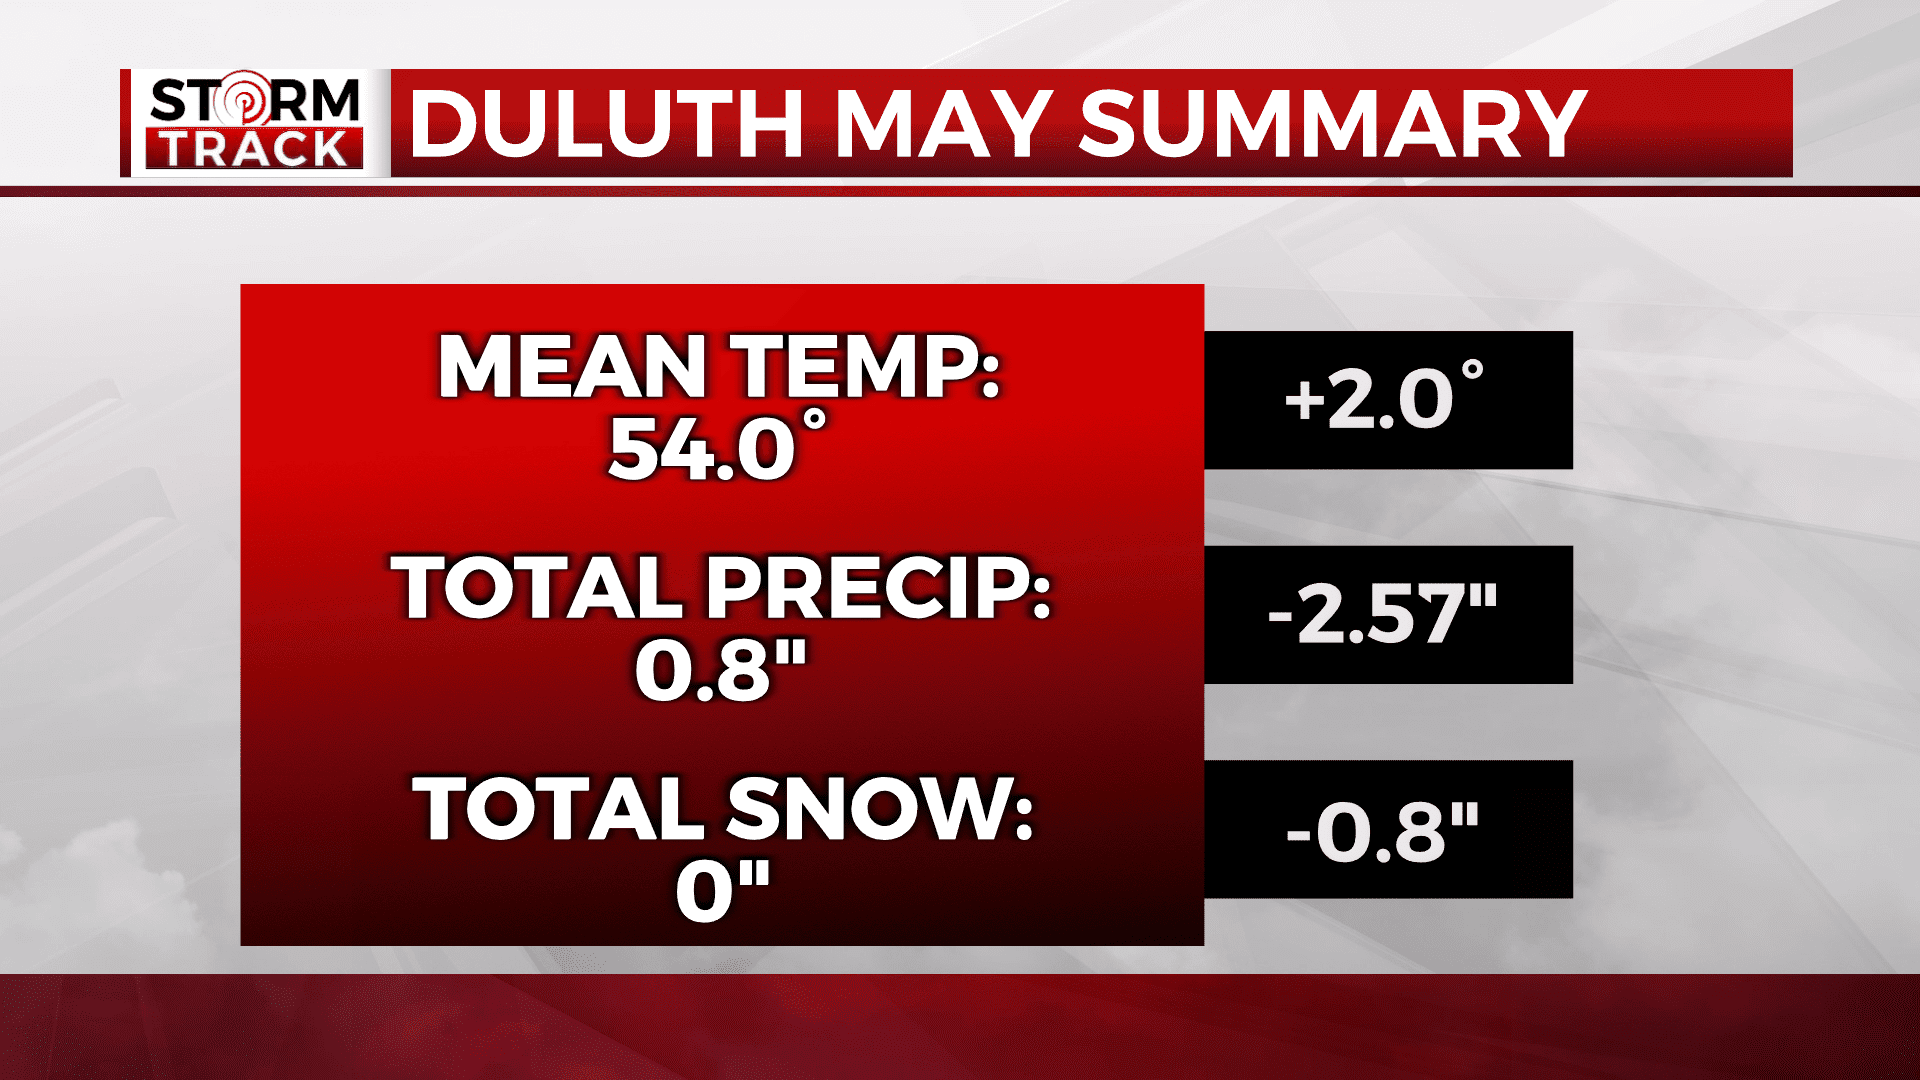 Duluth's temperature and precipitation for May compared to normal